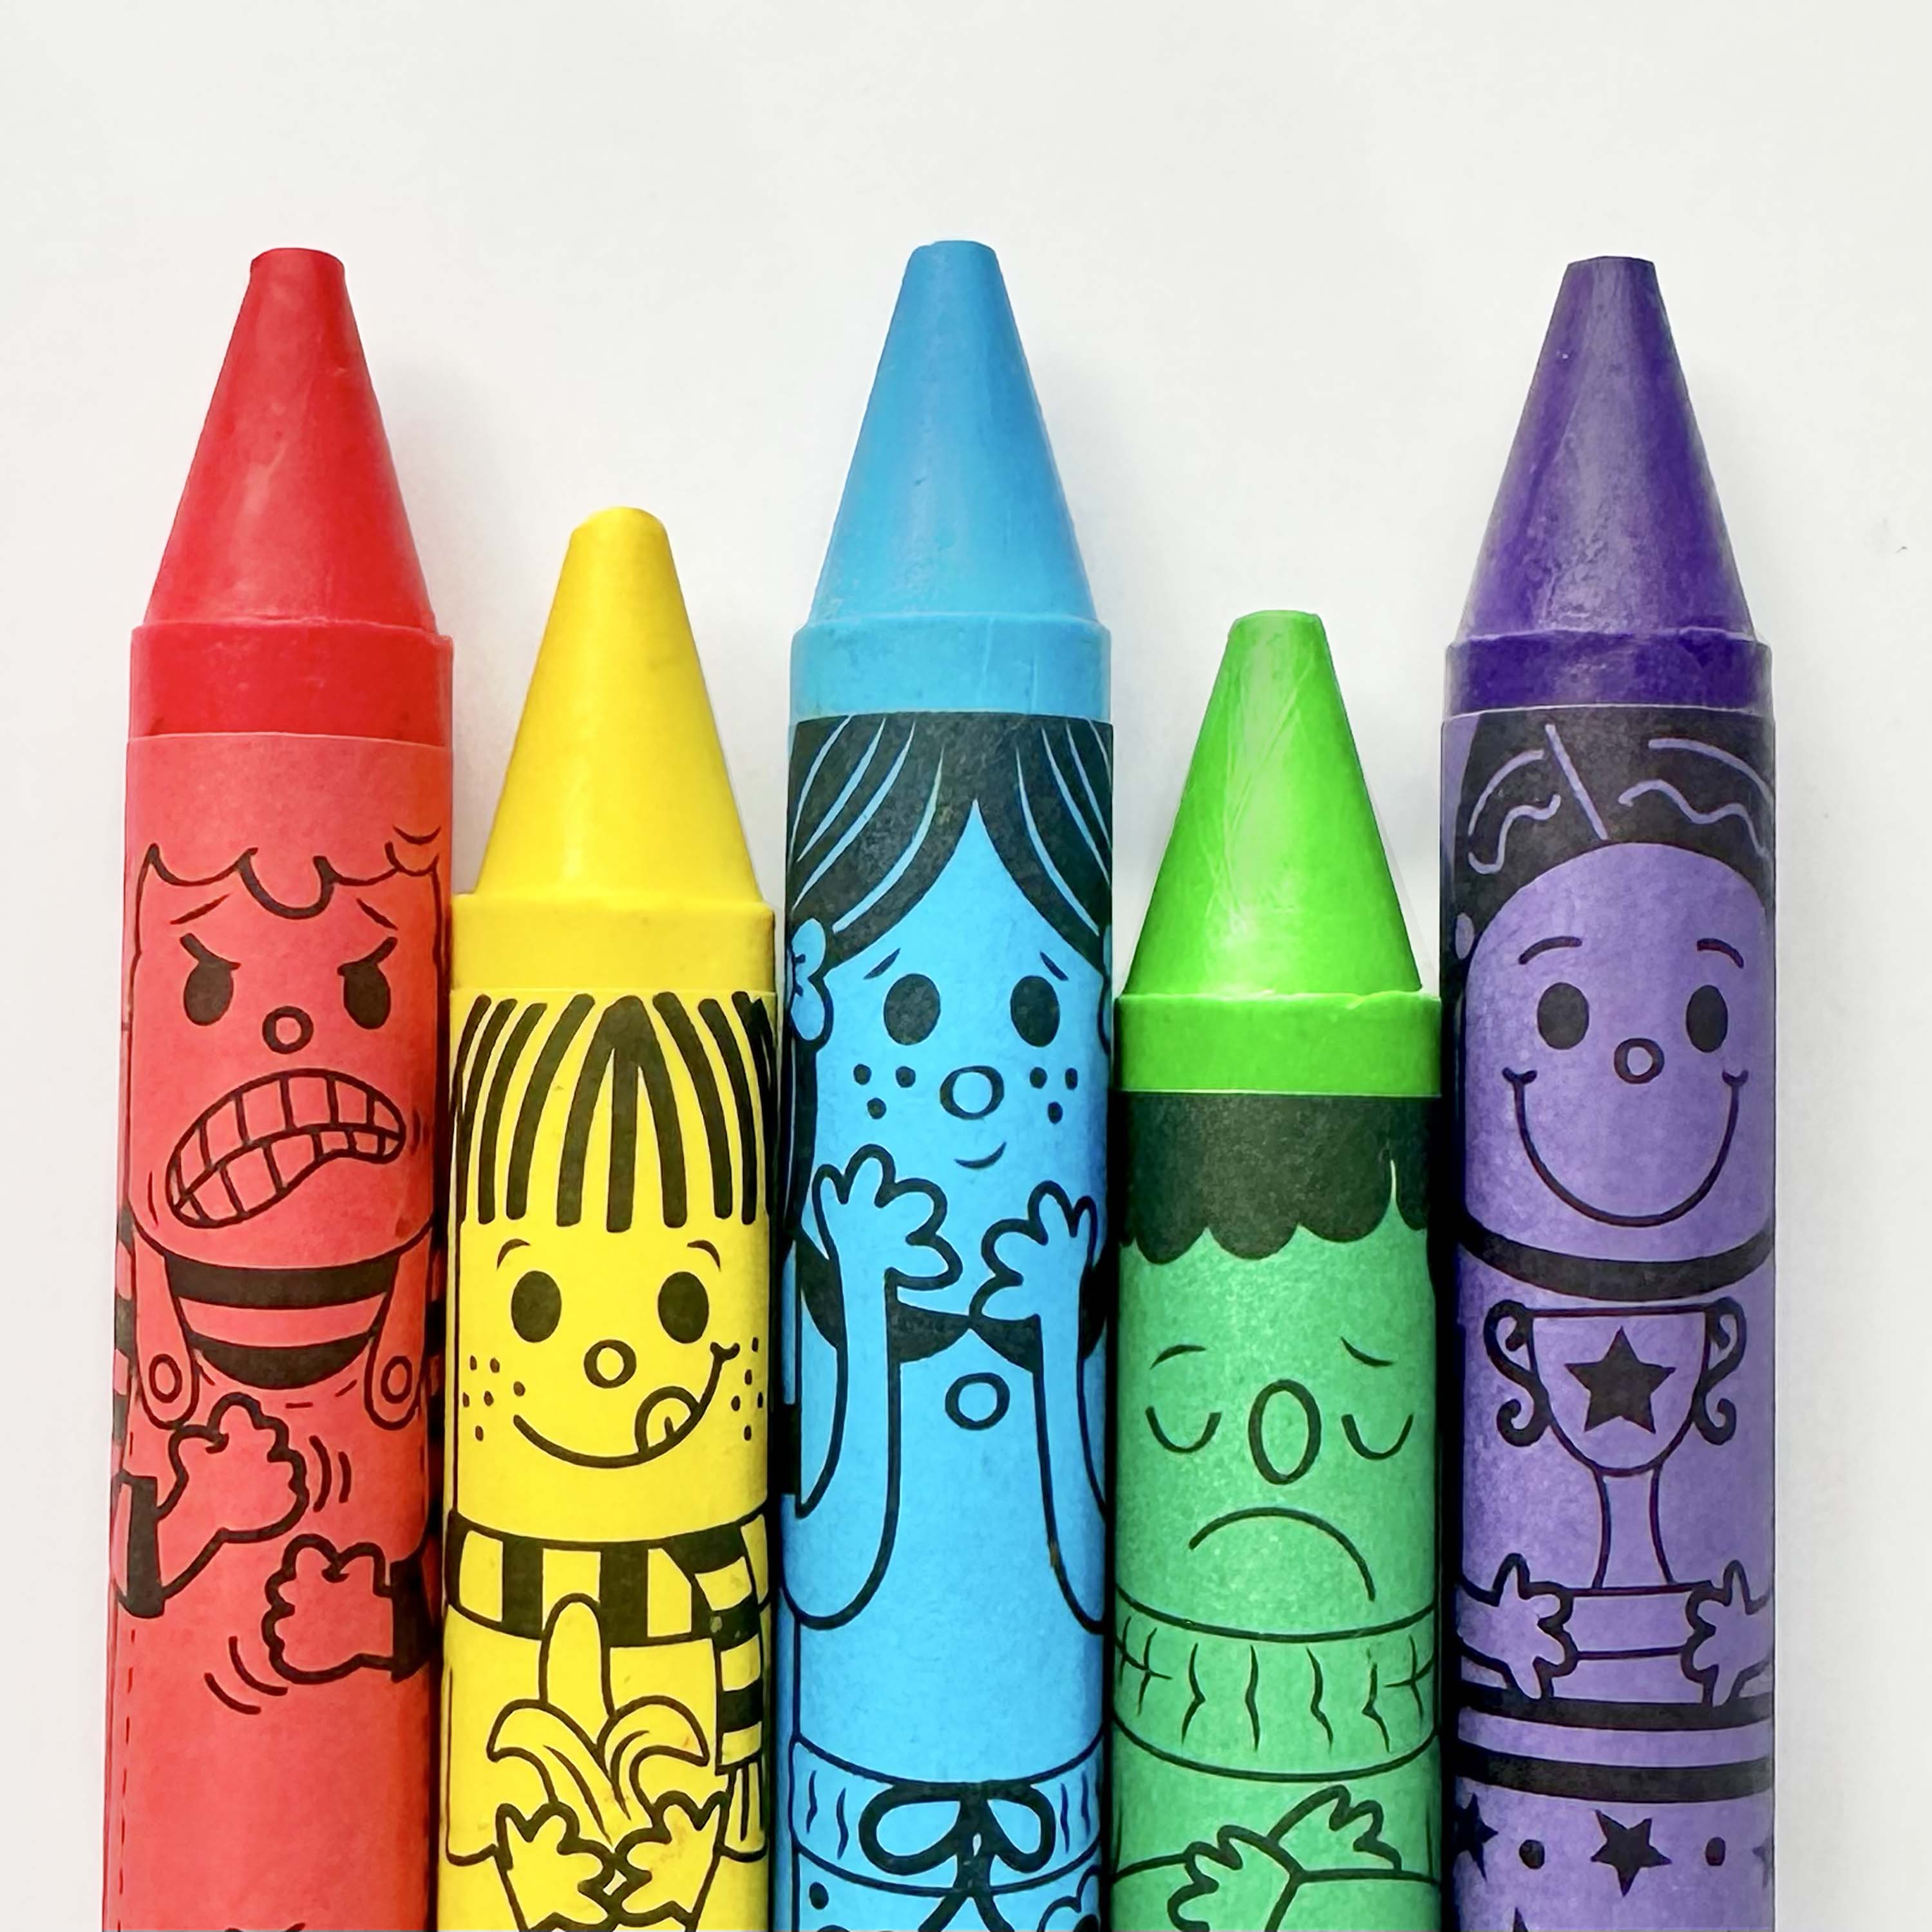 iHeartArt 24 Bright Crayons – brightstripes